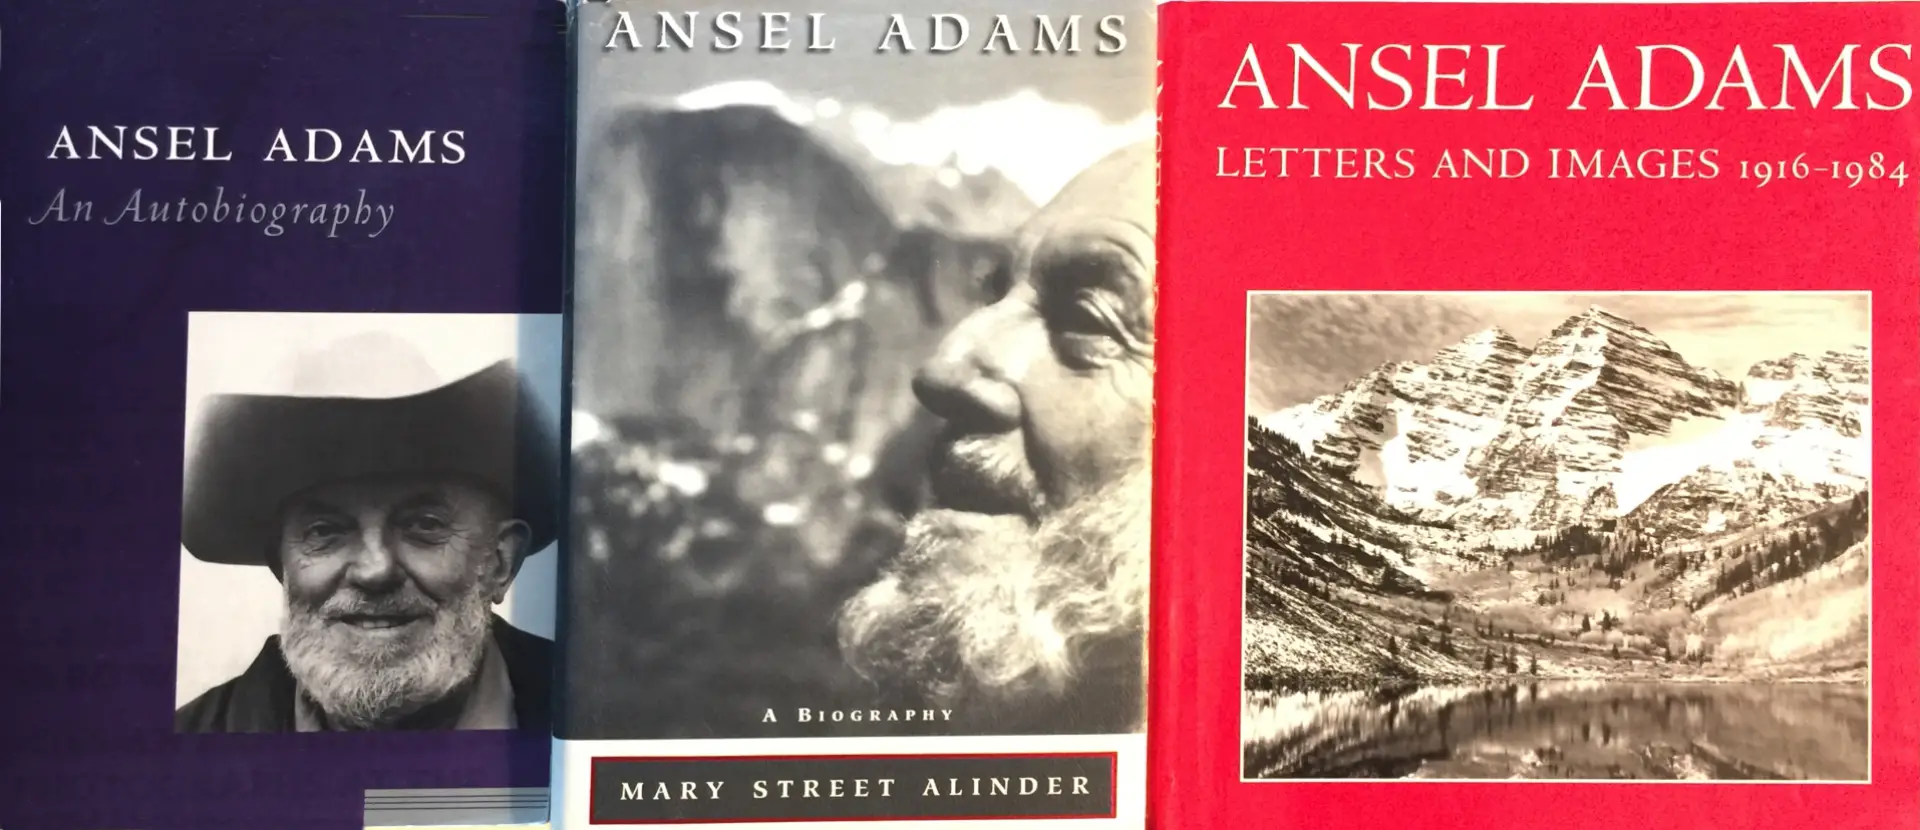 Mary Street Alinder books about Ansel Adams